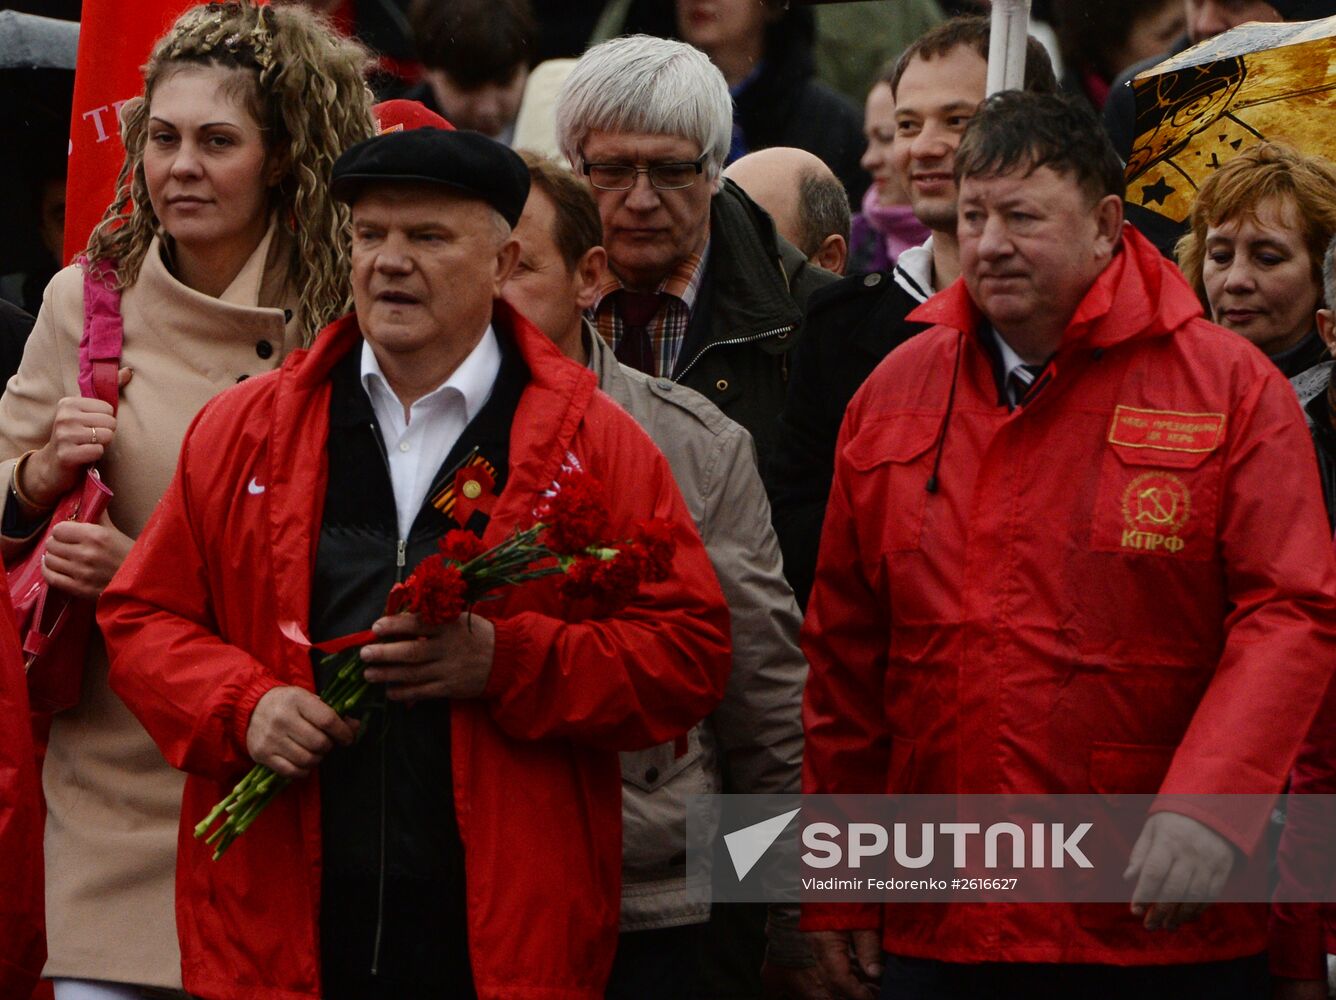 Communist march and rally in Moscow